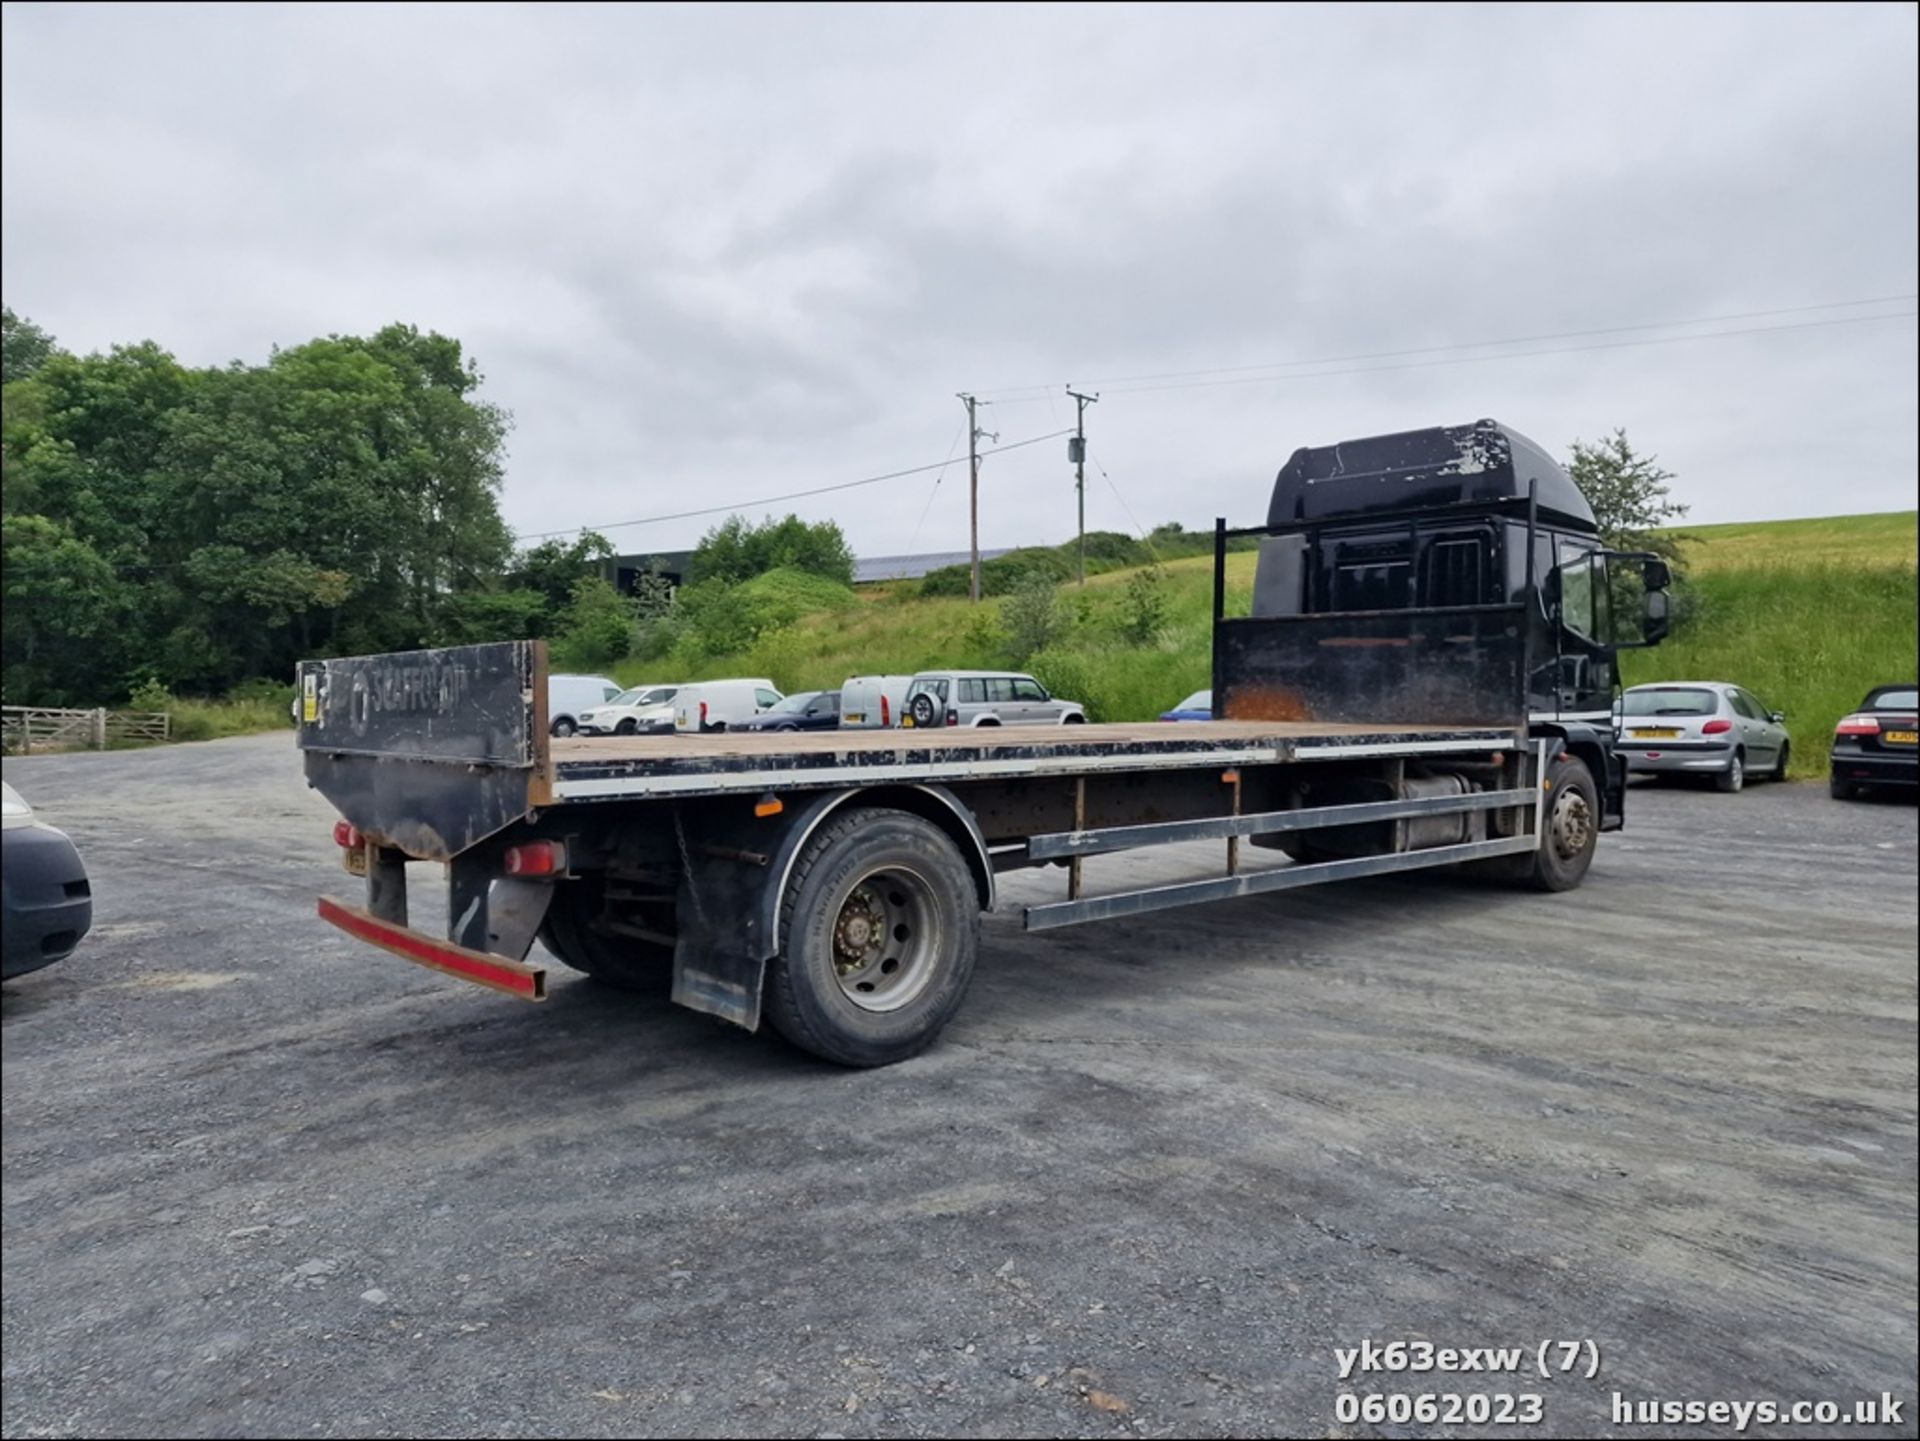 13/63 IVECO EUROCARGO (MY 2008) - 5880cc 2dr Flat Bed (Black) - Image 7 of 21